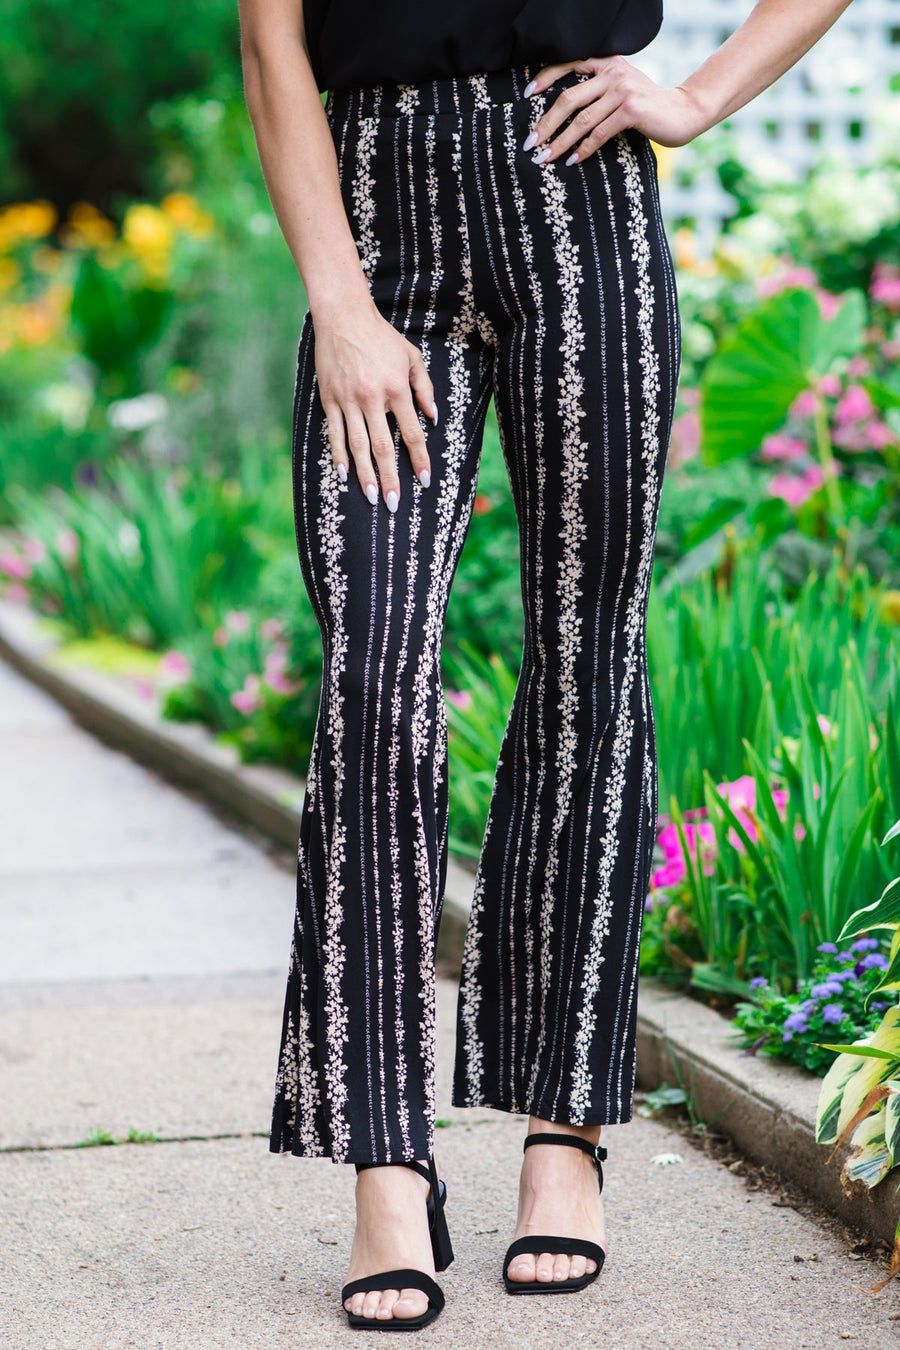 Black and Tan Floral Print Flare Pants - Filly Flair